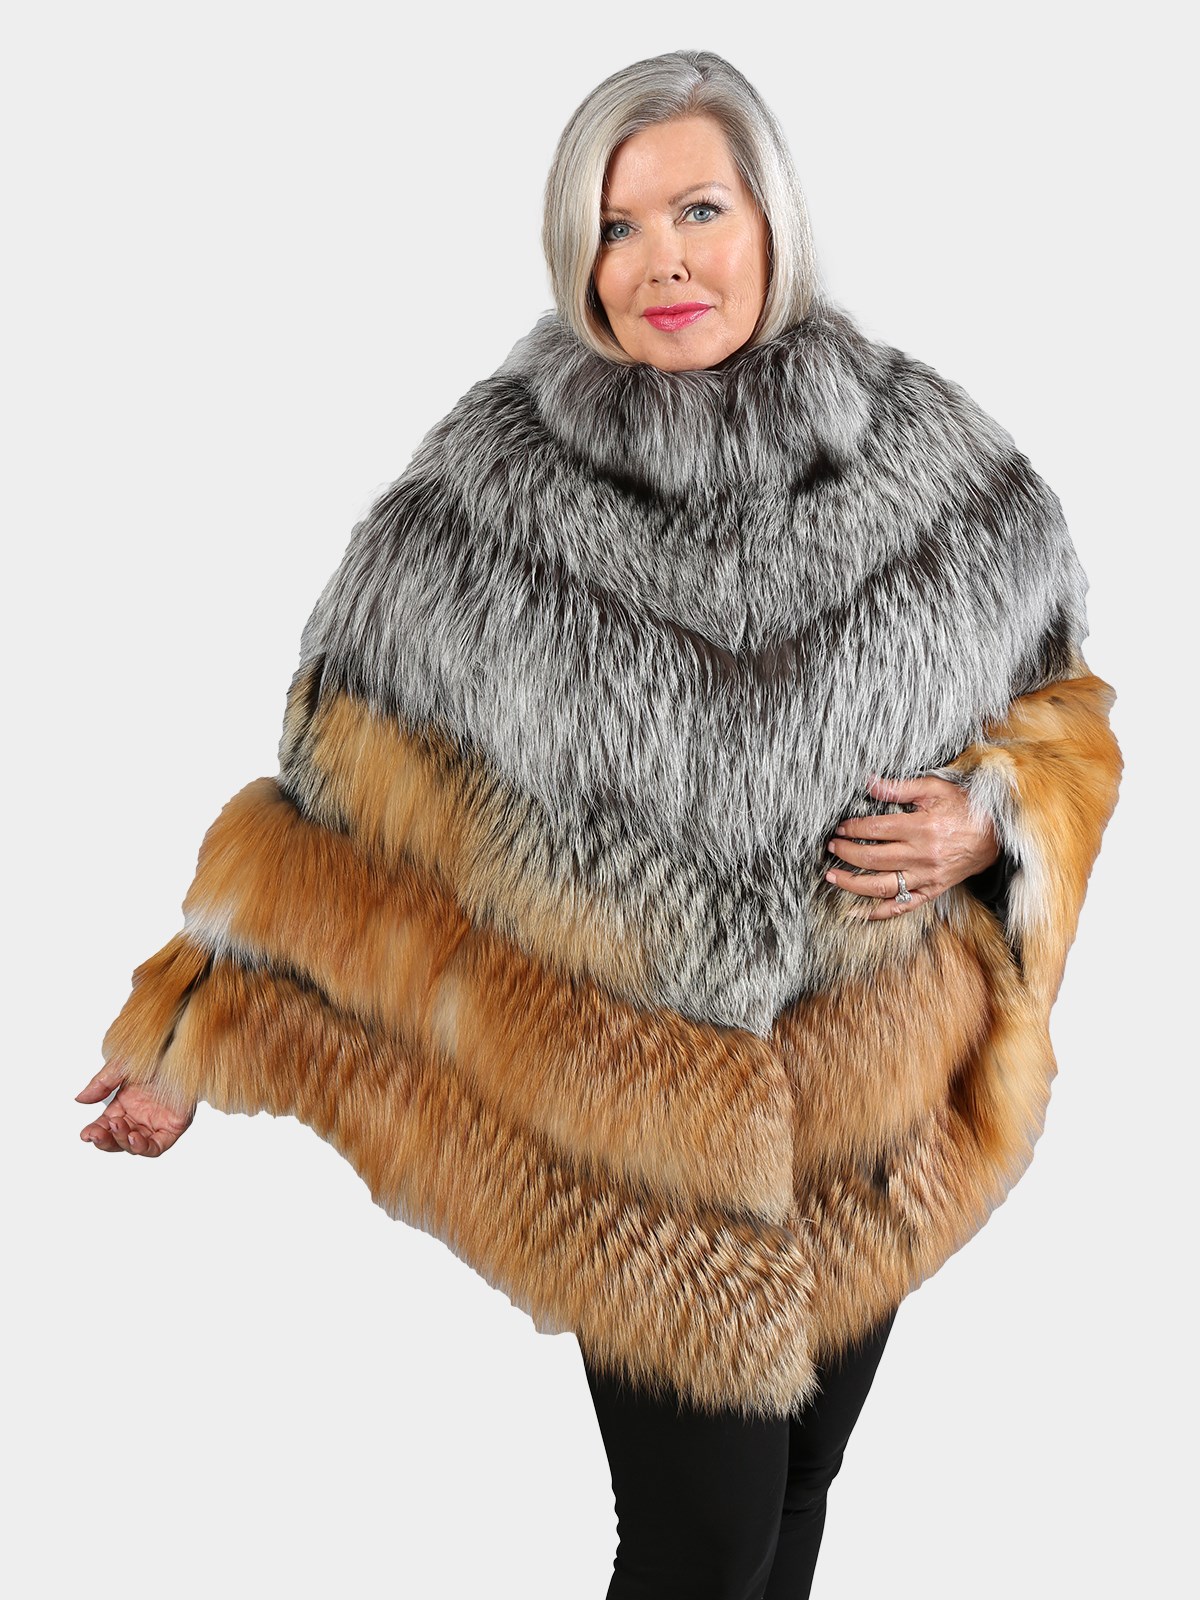 Woman's Silver and Red Fox Fur Cape